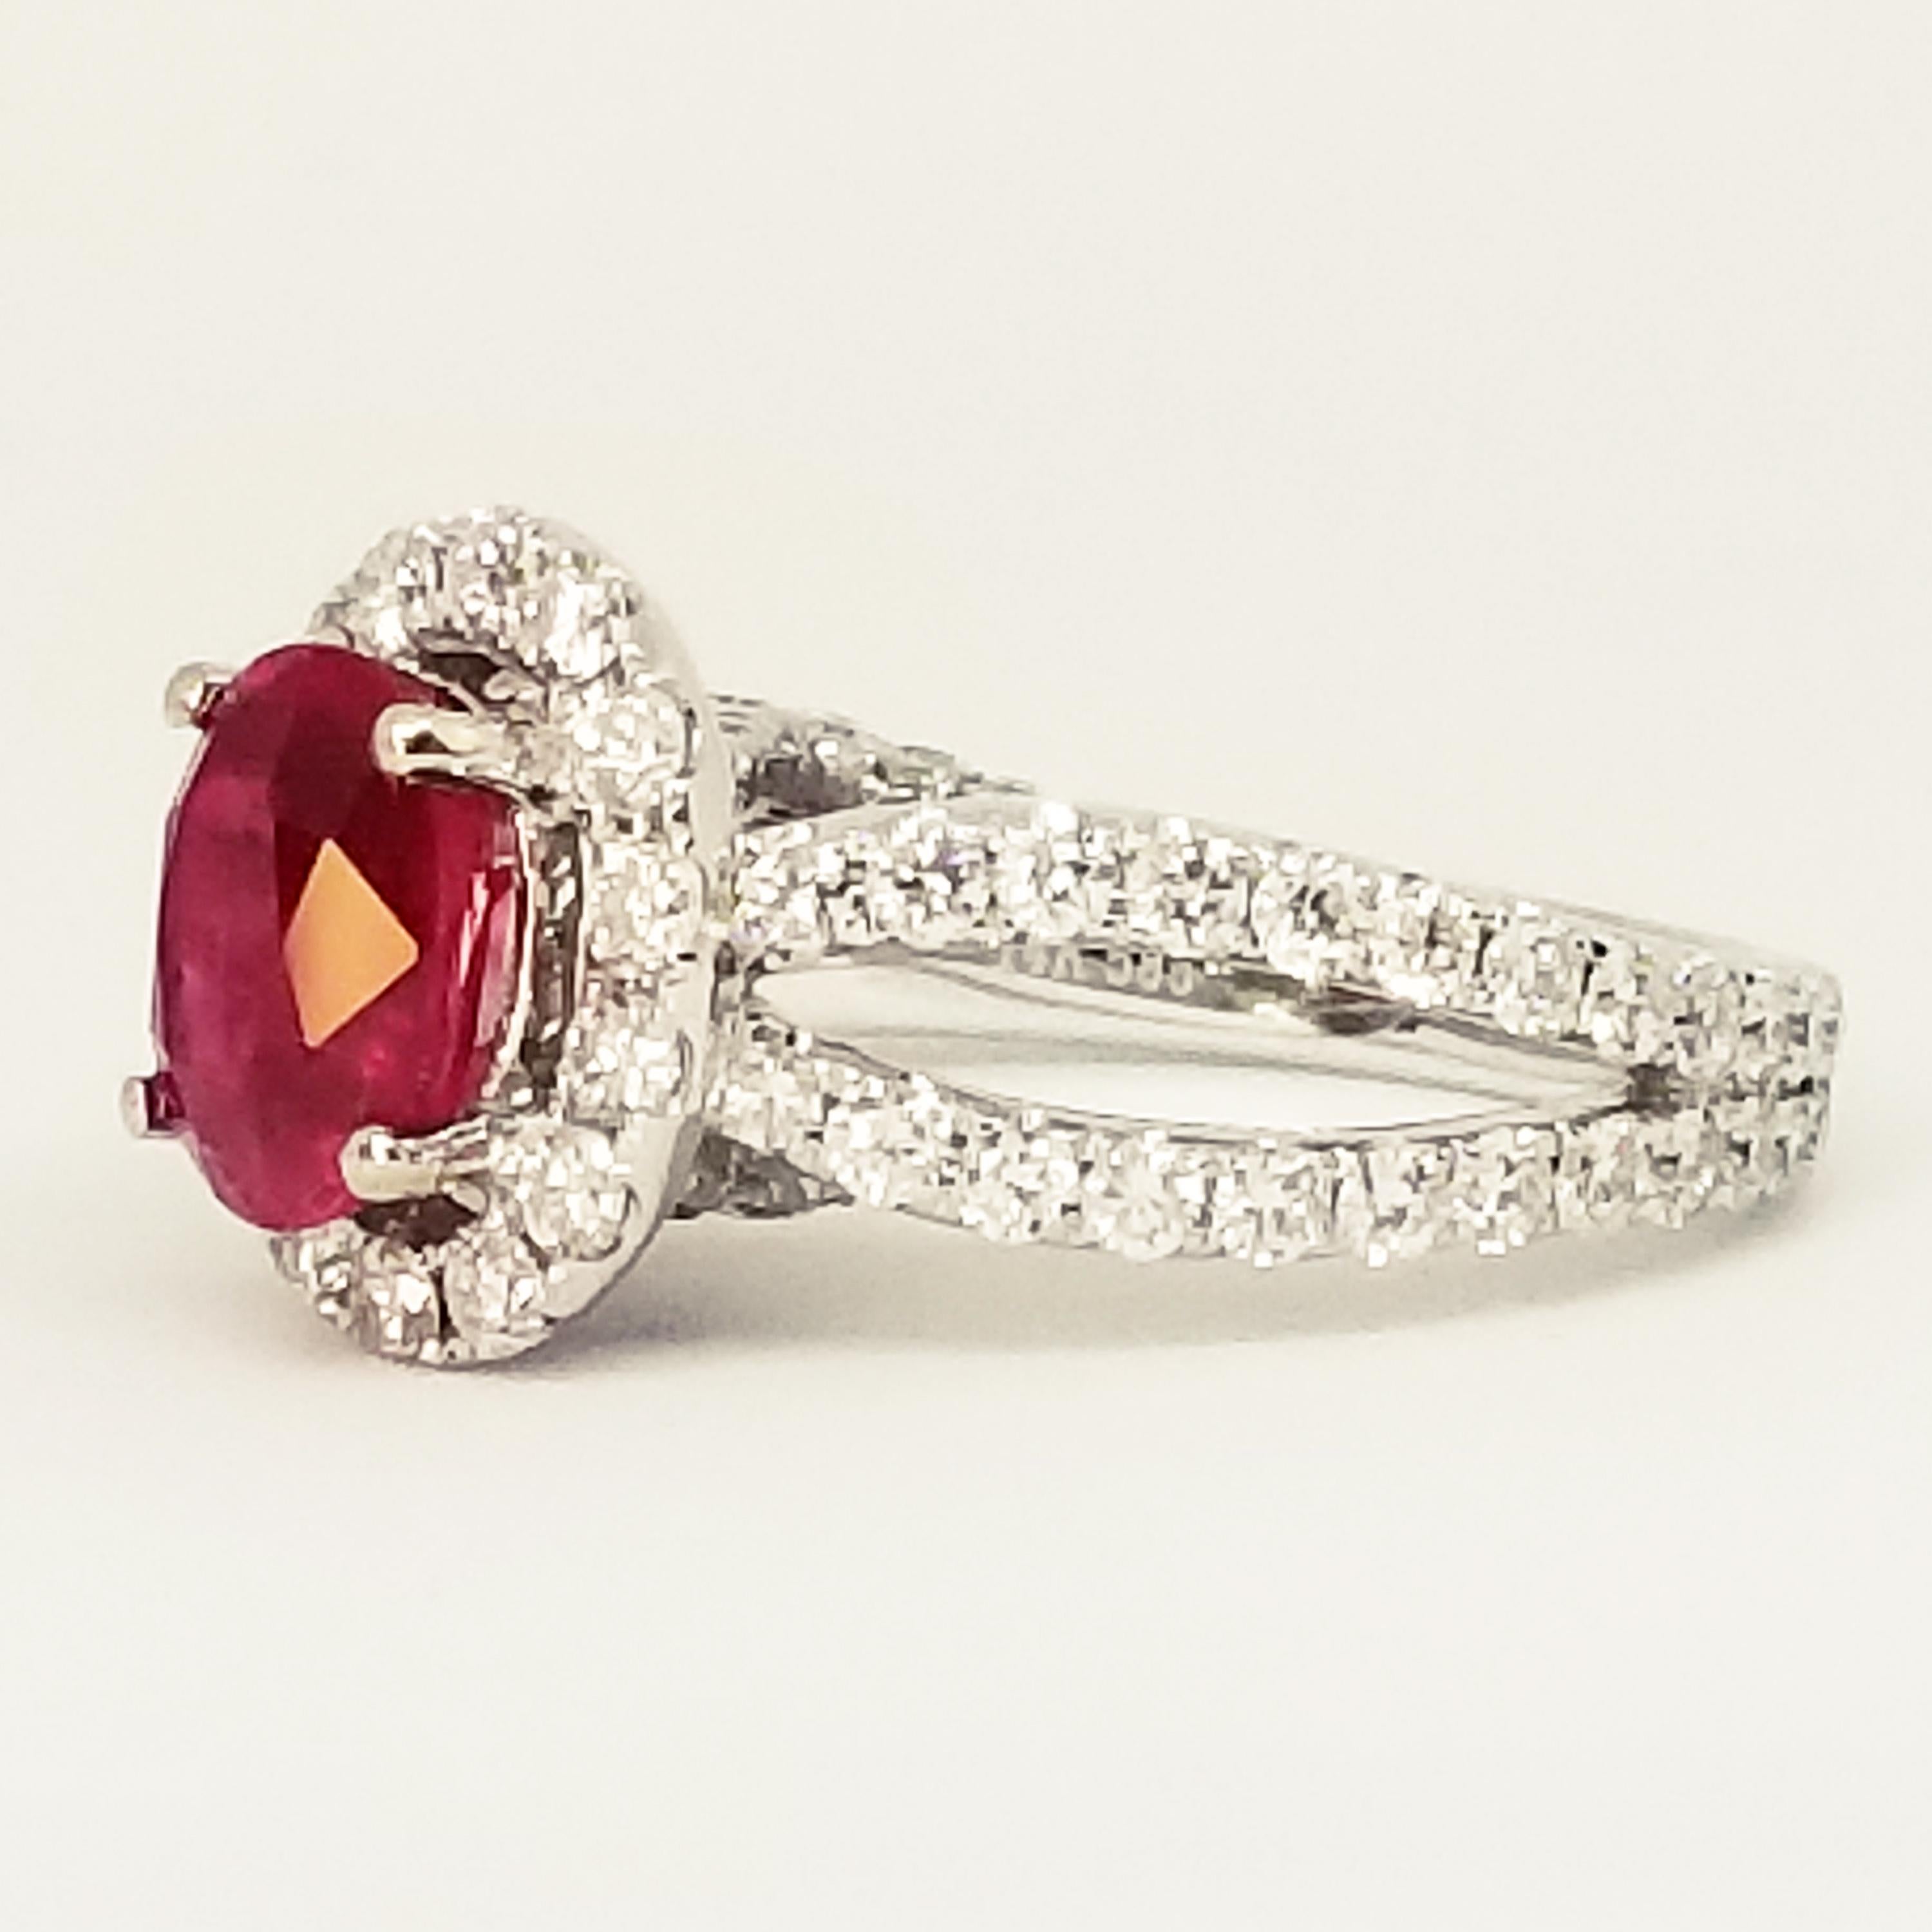 A Contemporary Engagement or Cocktail Ring is set with a 2.38 Carat Oval Ruby with Deep Color Saturation. The Gem Quality stone is set in prongs and surrounded by an oval Halo of Round Brilliant Diamonds. The Woven shoulders and sides of the ring